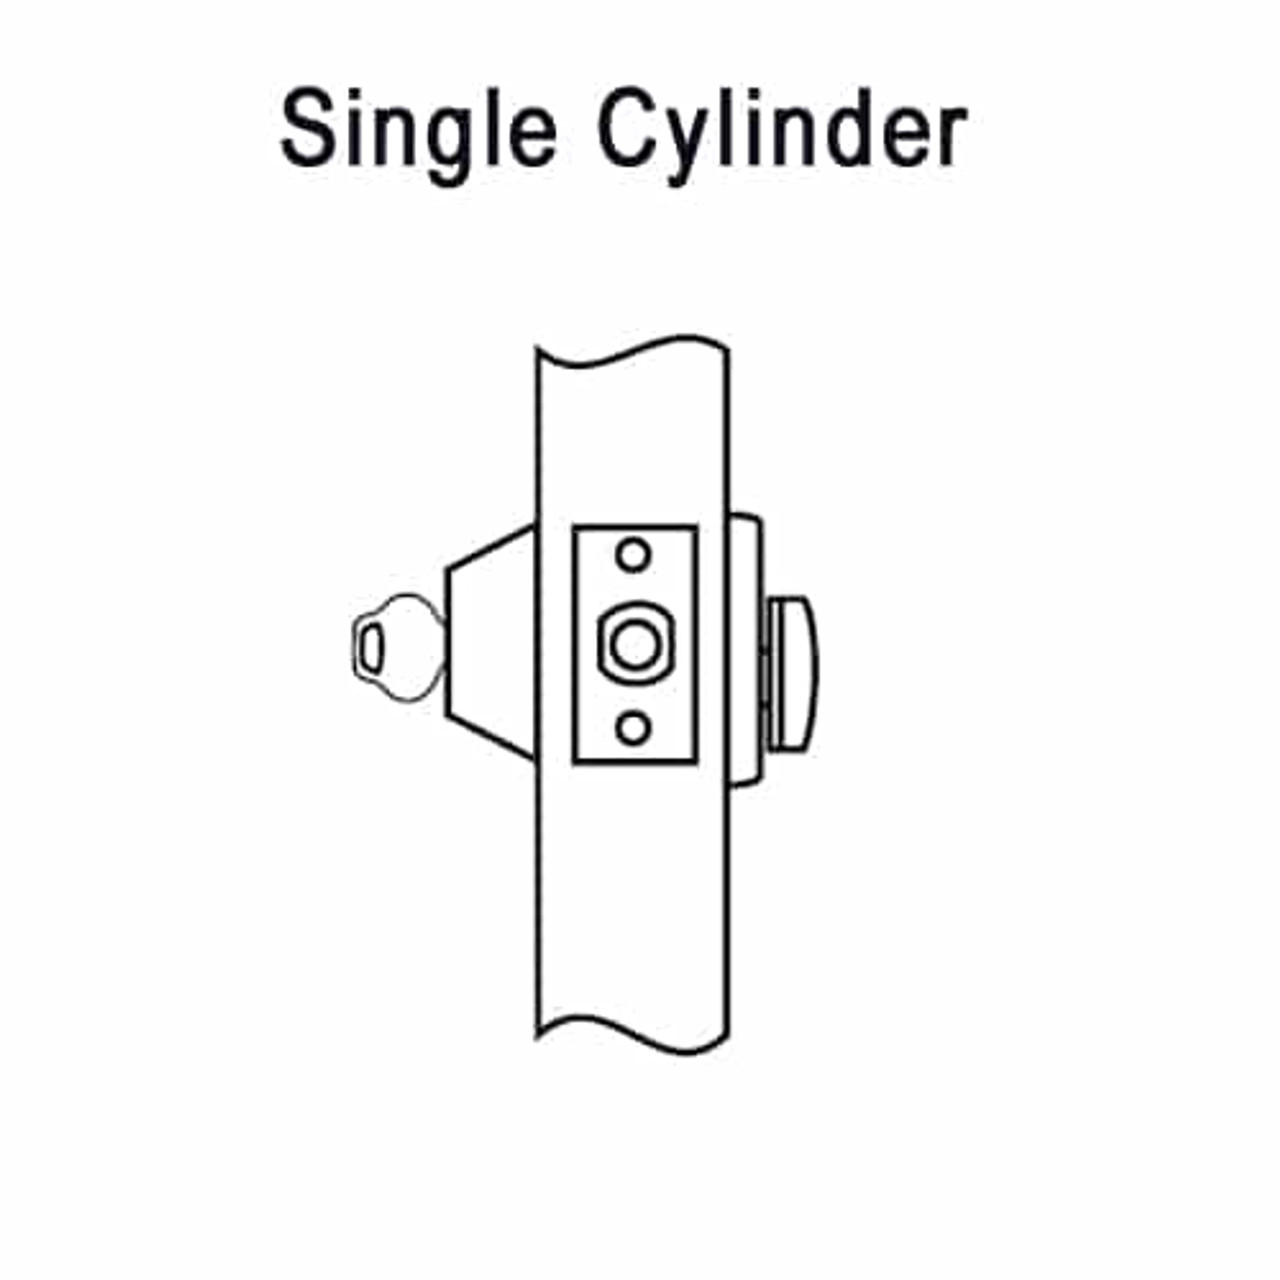 DL3213-612-CL7 Corbin DL3200 Series IC 7-Pin Less Core Cylindrical Deadlocks with Single Cylinder in Satin Bronze